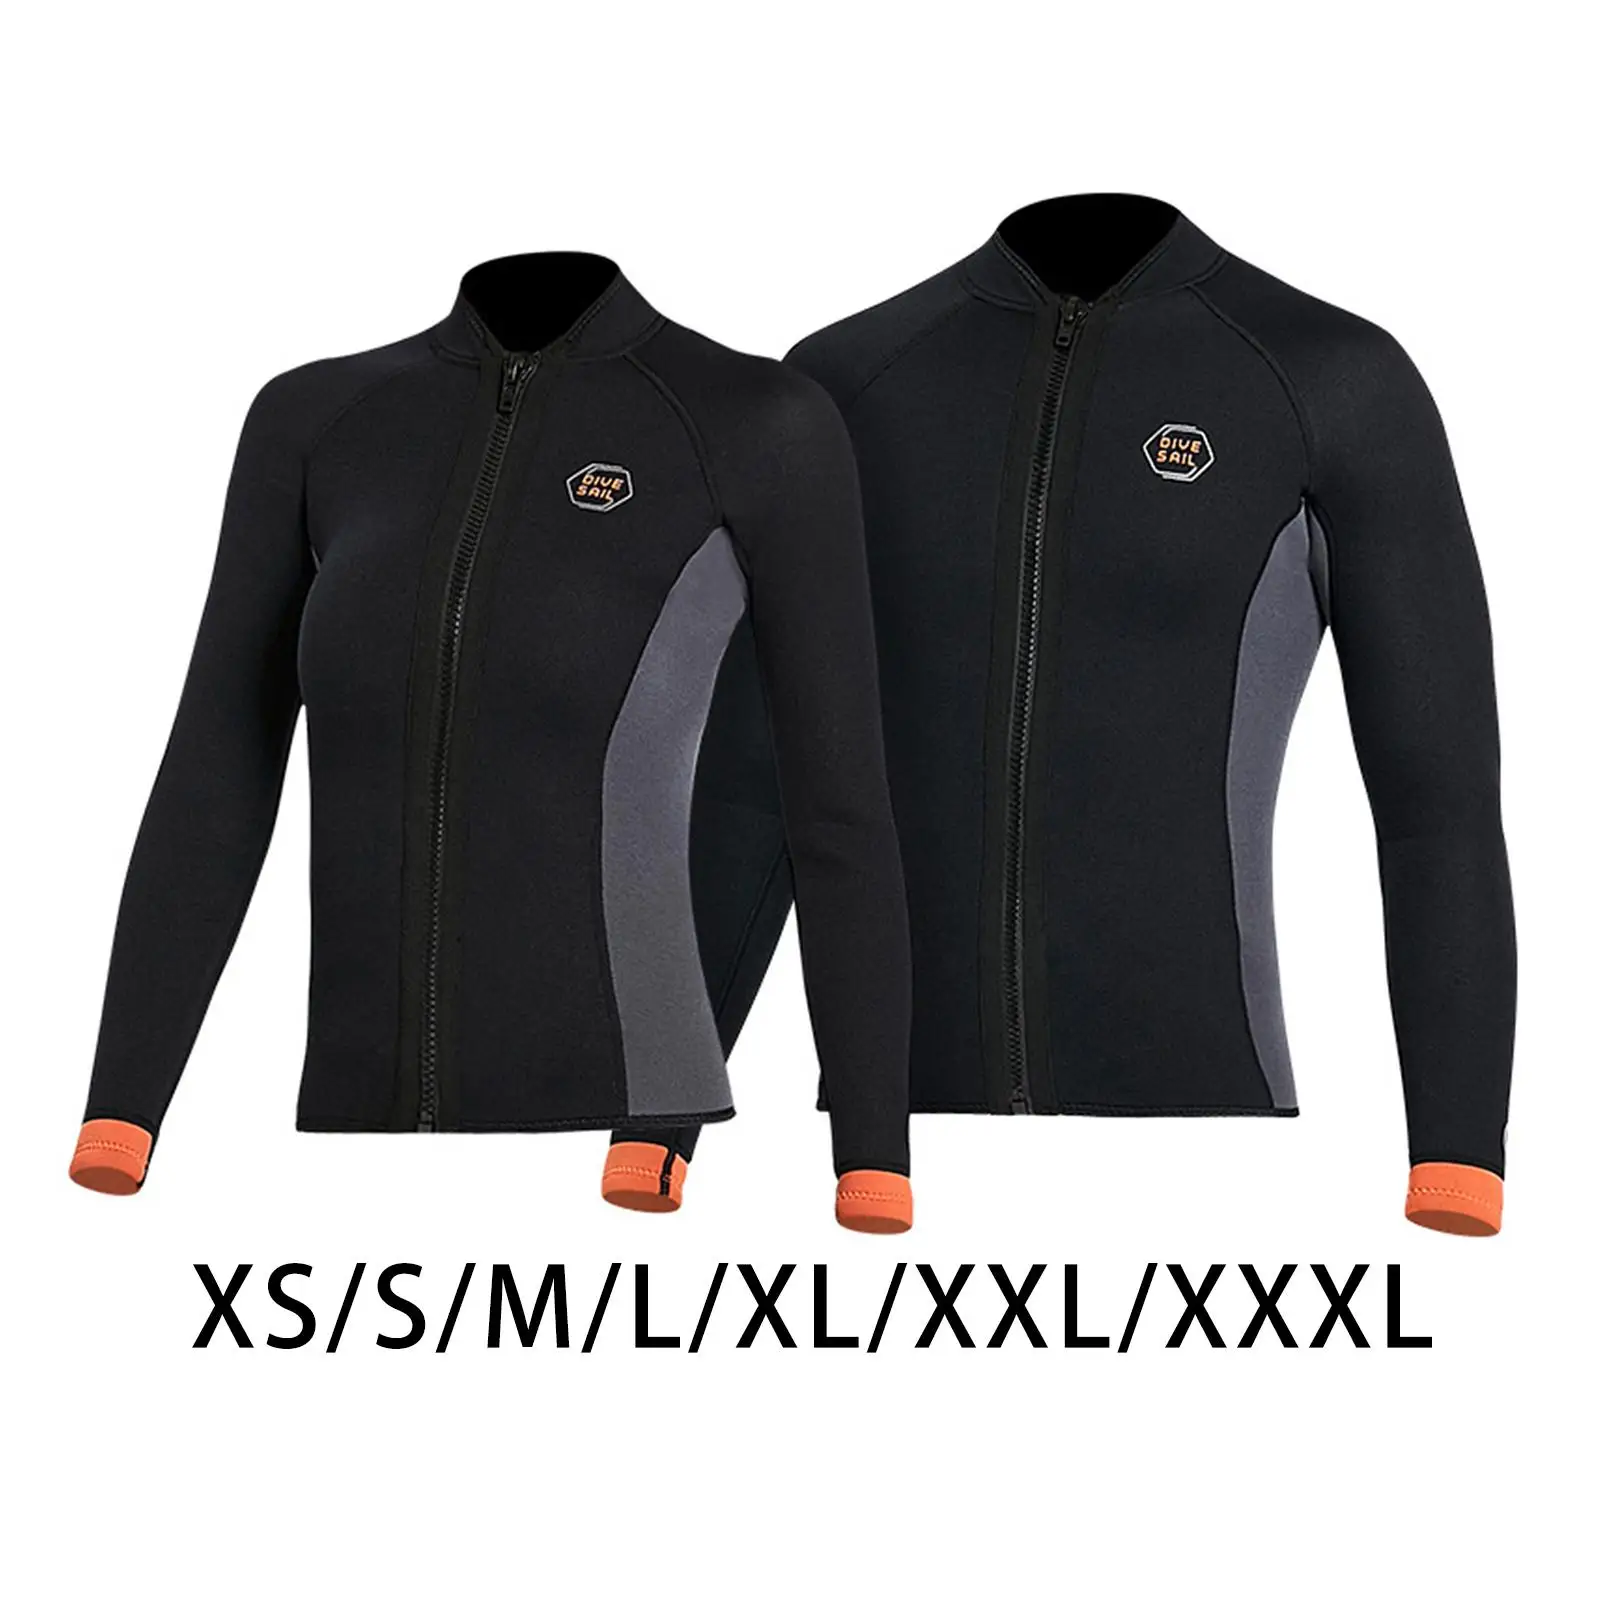 3mm Neoprene Wetsuit Tops Diving Sports Suit Long Sleeve Swimsuits Swimming Swimwear for Water Sports Scuba Diving Snorkeling